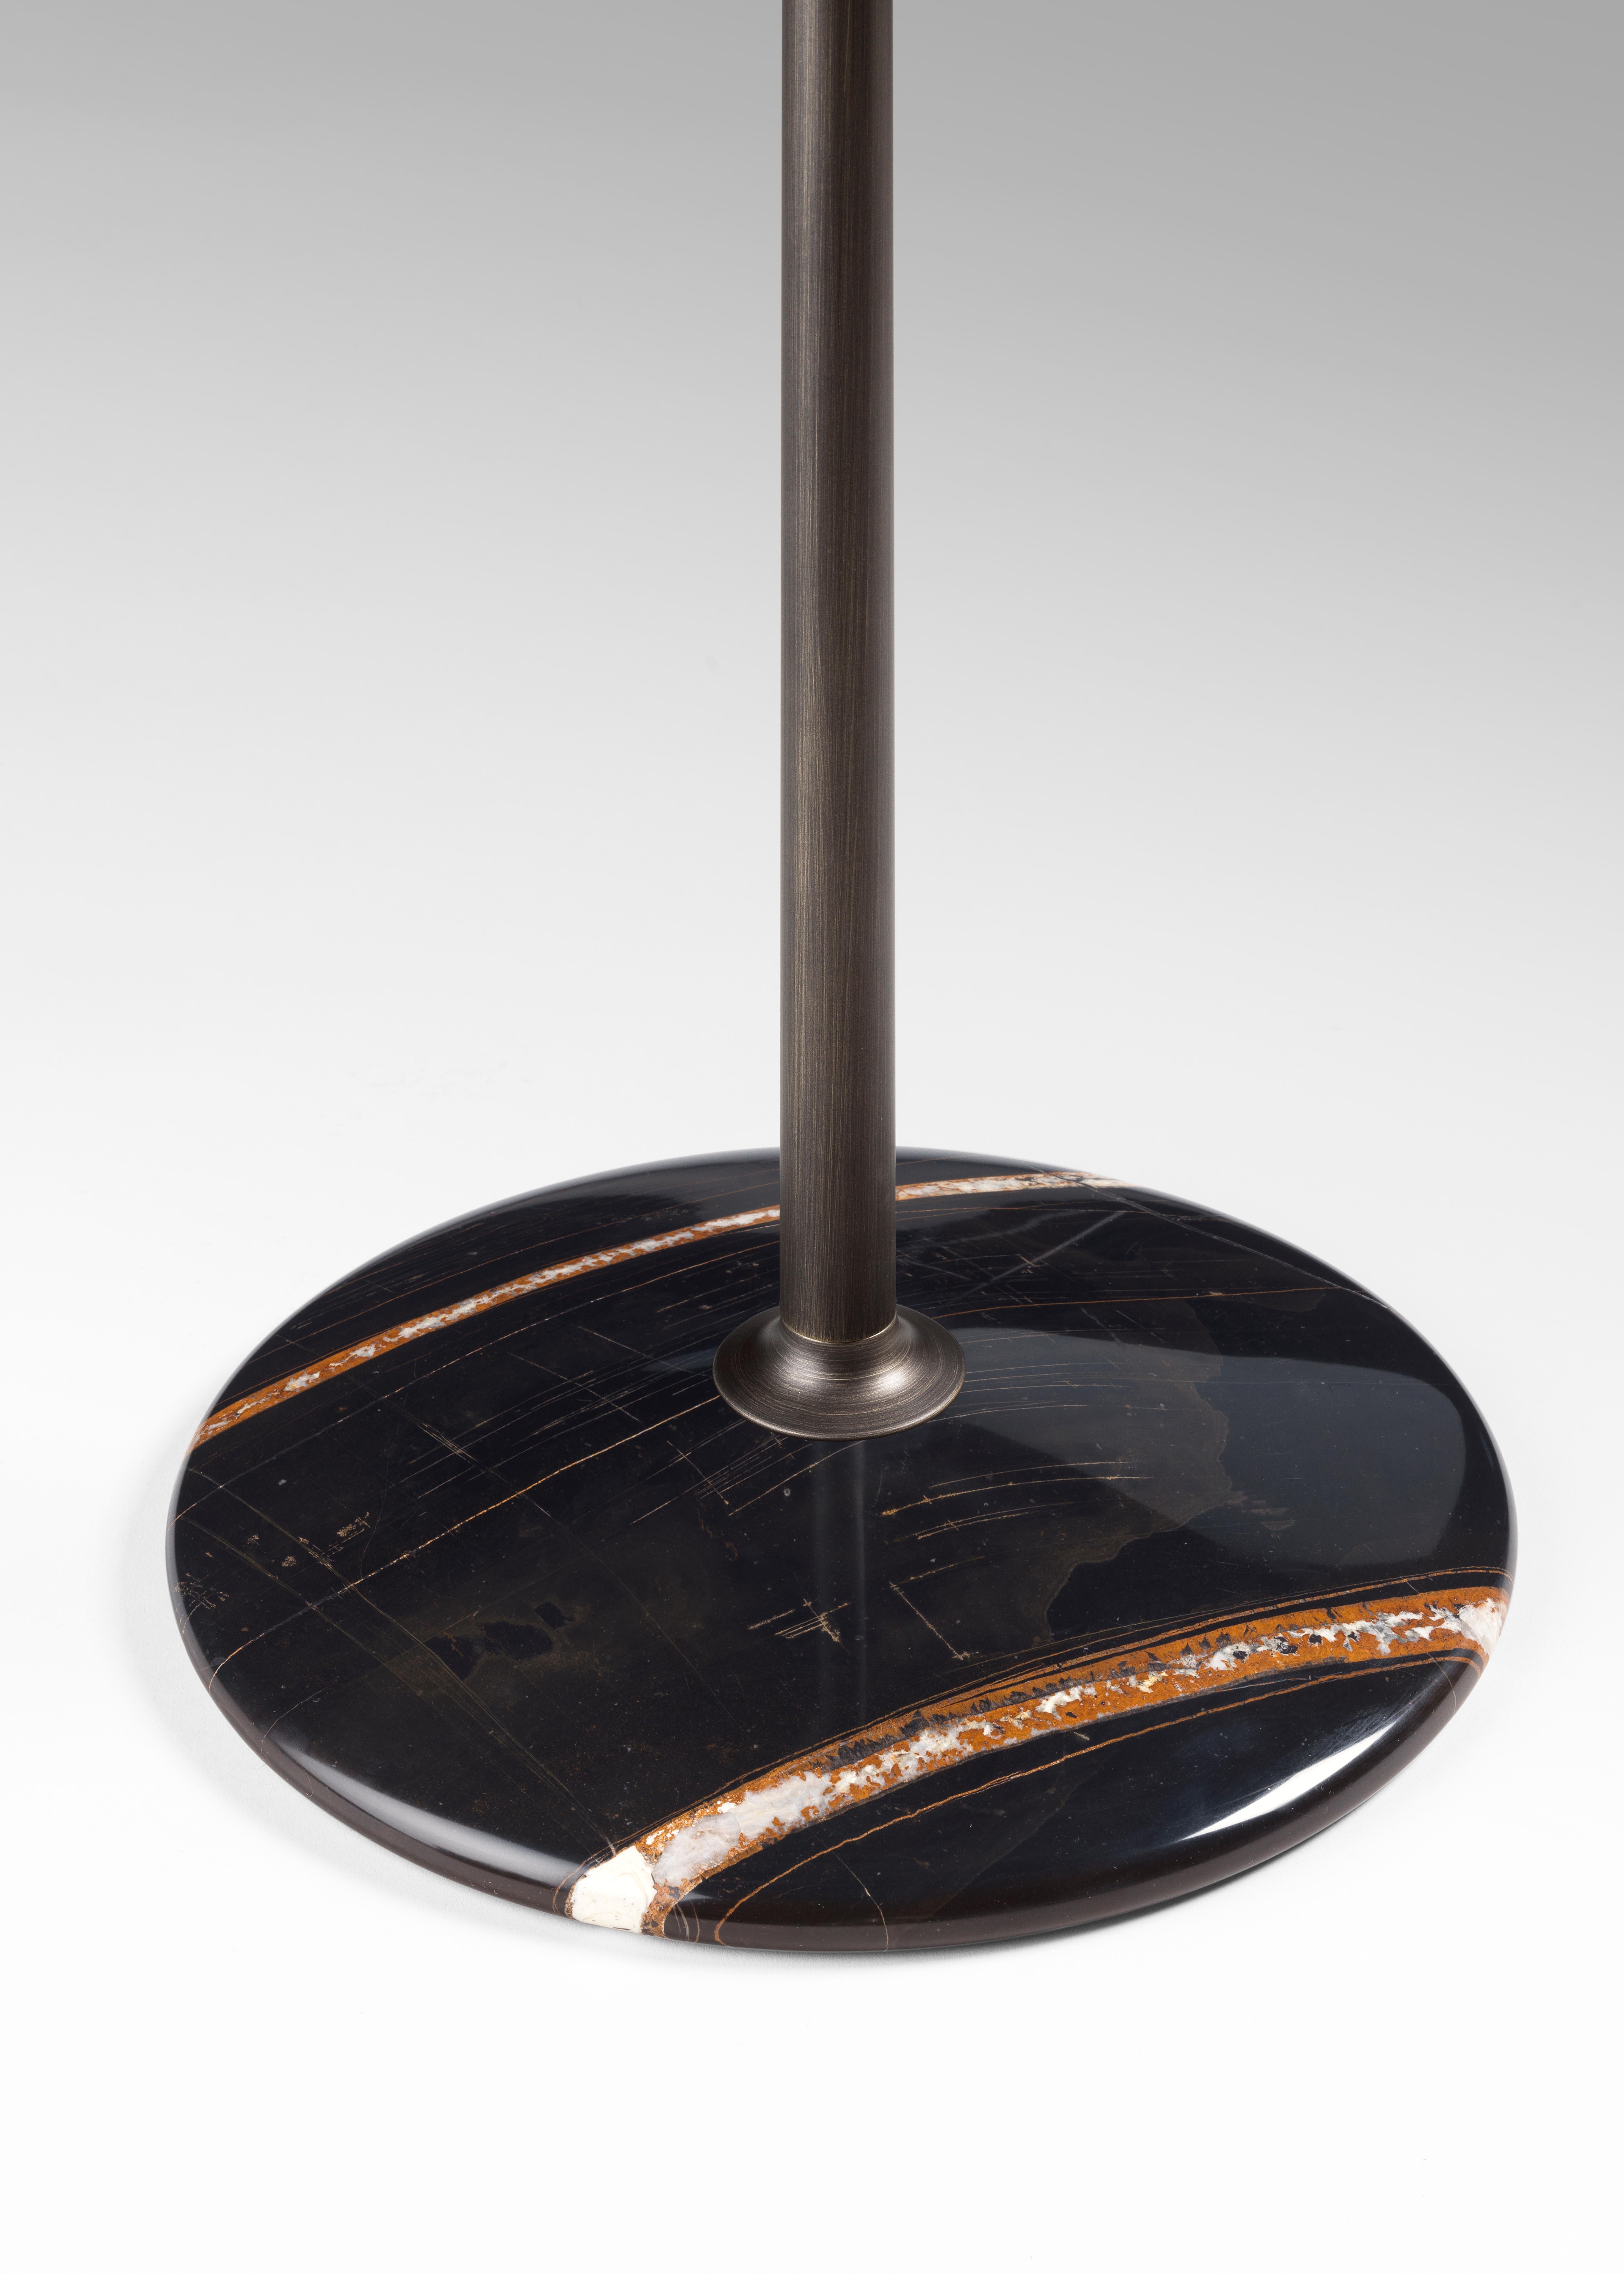 Marble Arnold Tall Table, Sahara Noir Top, Burnished Brass Structure, Made in Italy For Sale